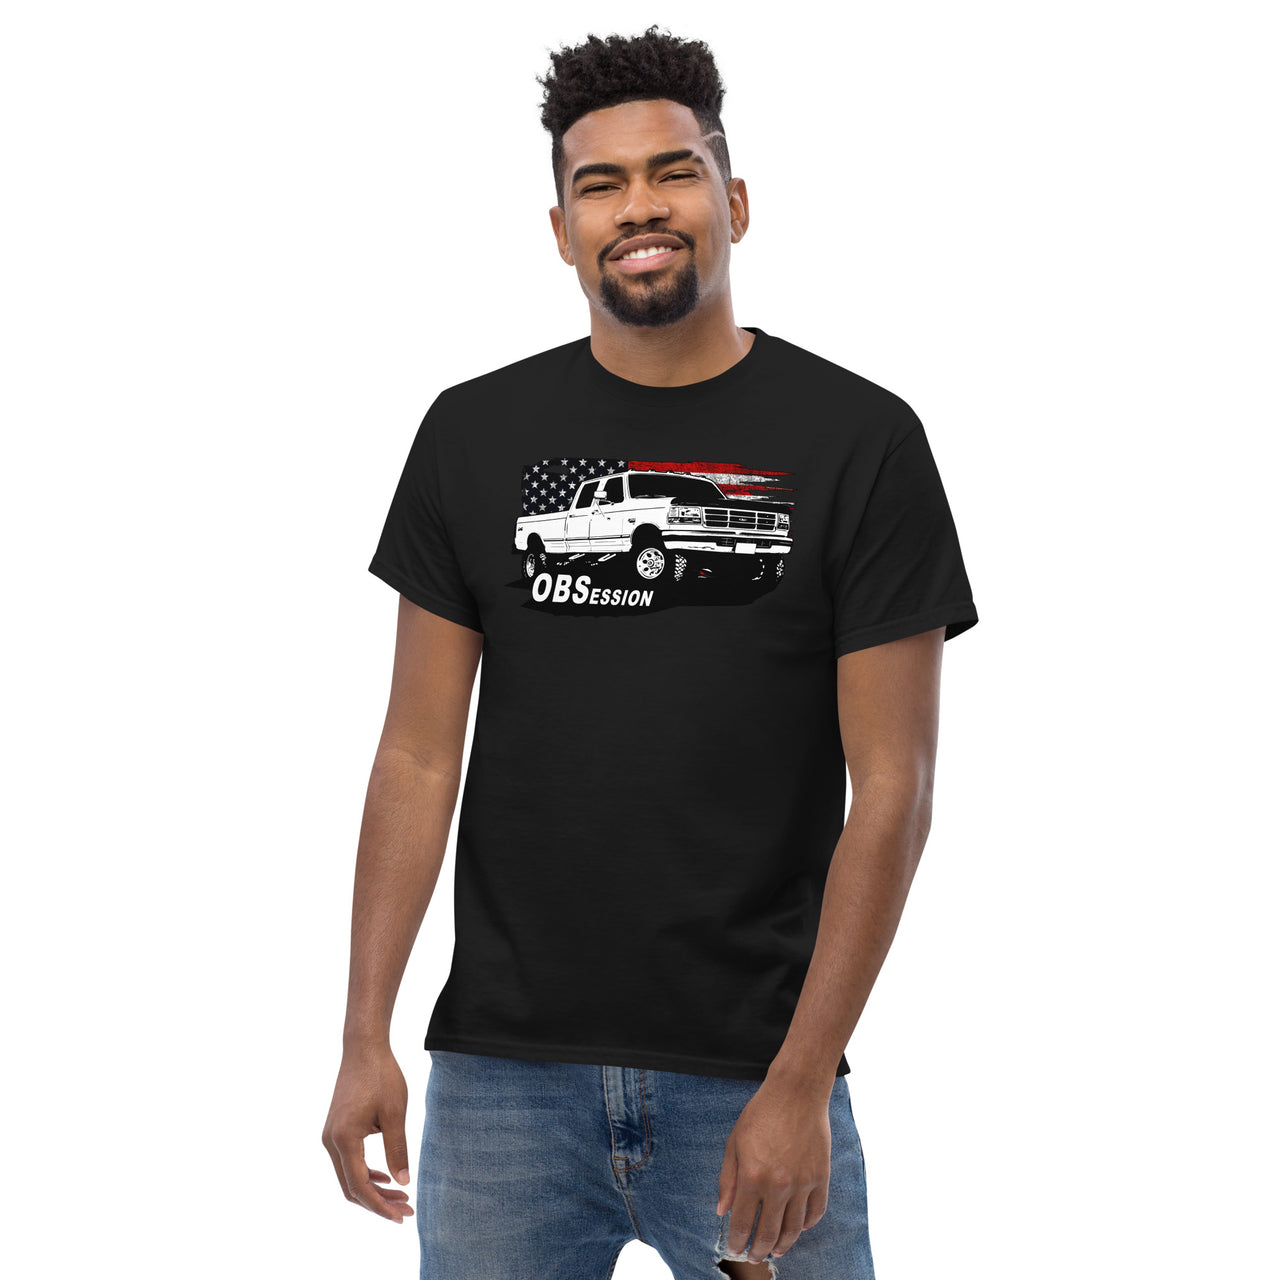 OBS Crew Cab Truck American Flag T-Shirt modeled in black